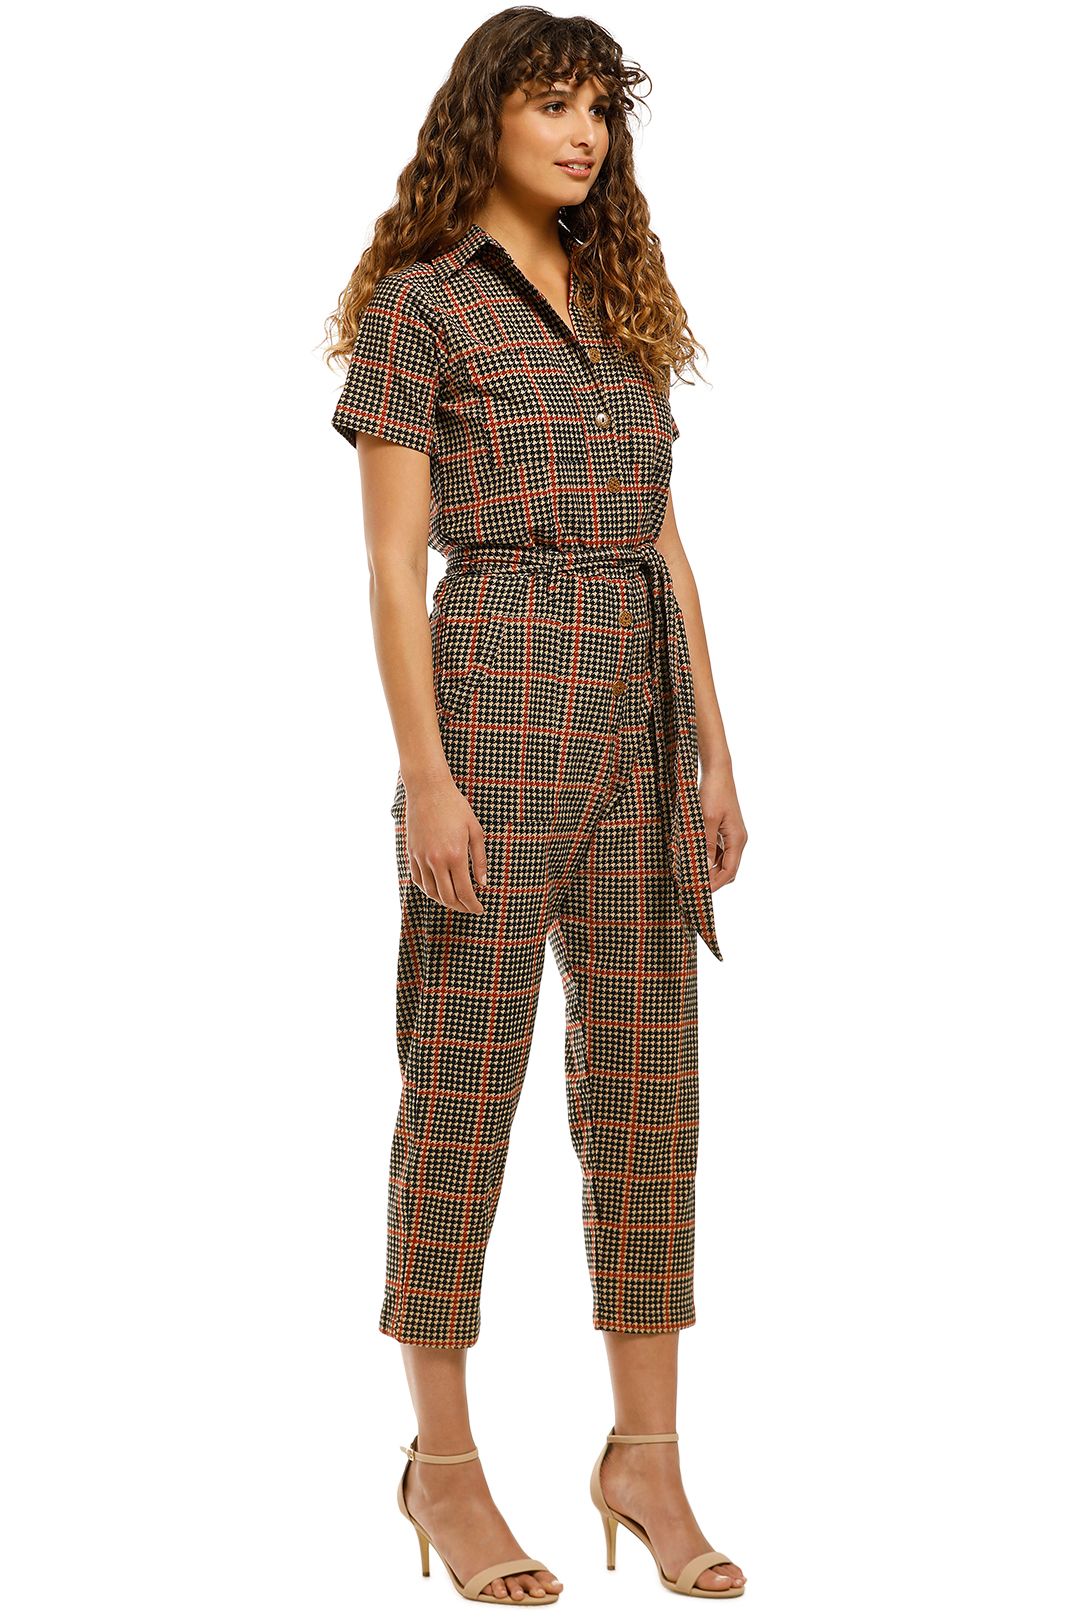 Rue-Stiic-Alamere-Worksuit-Houndstooth-Side